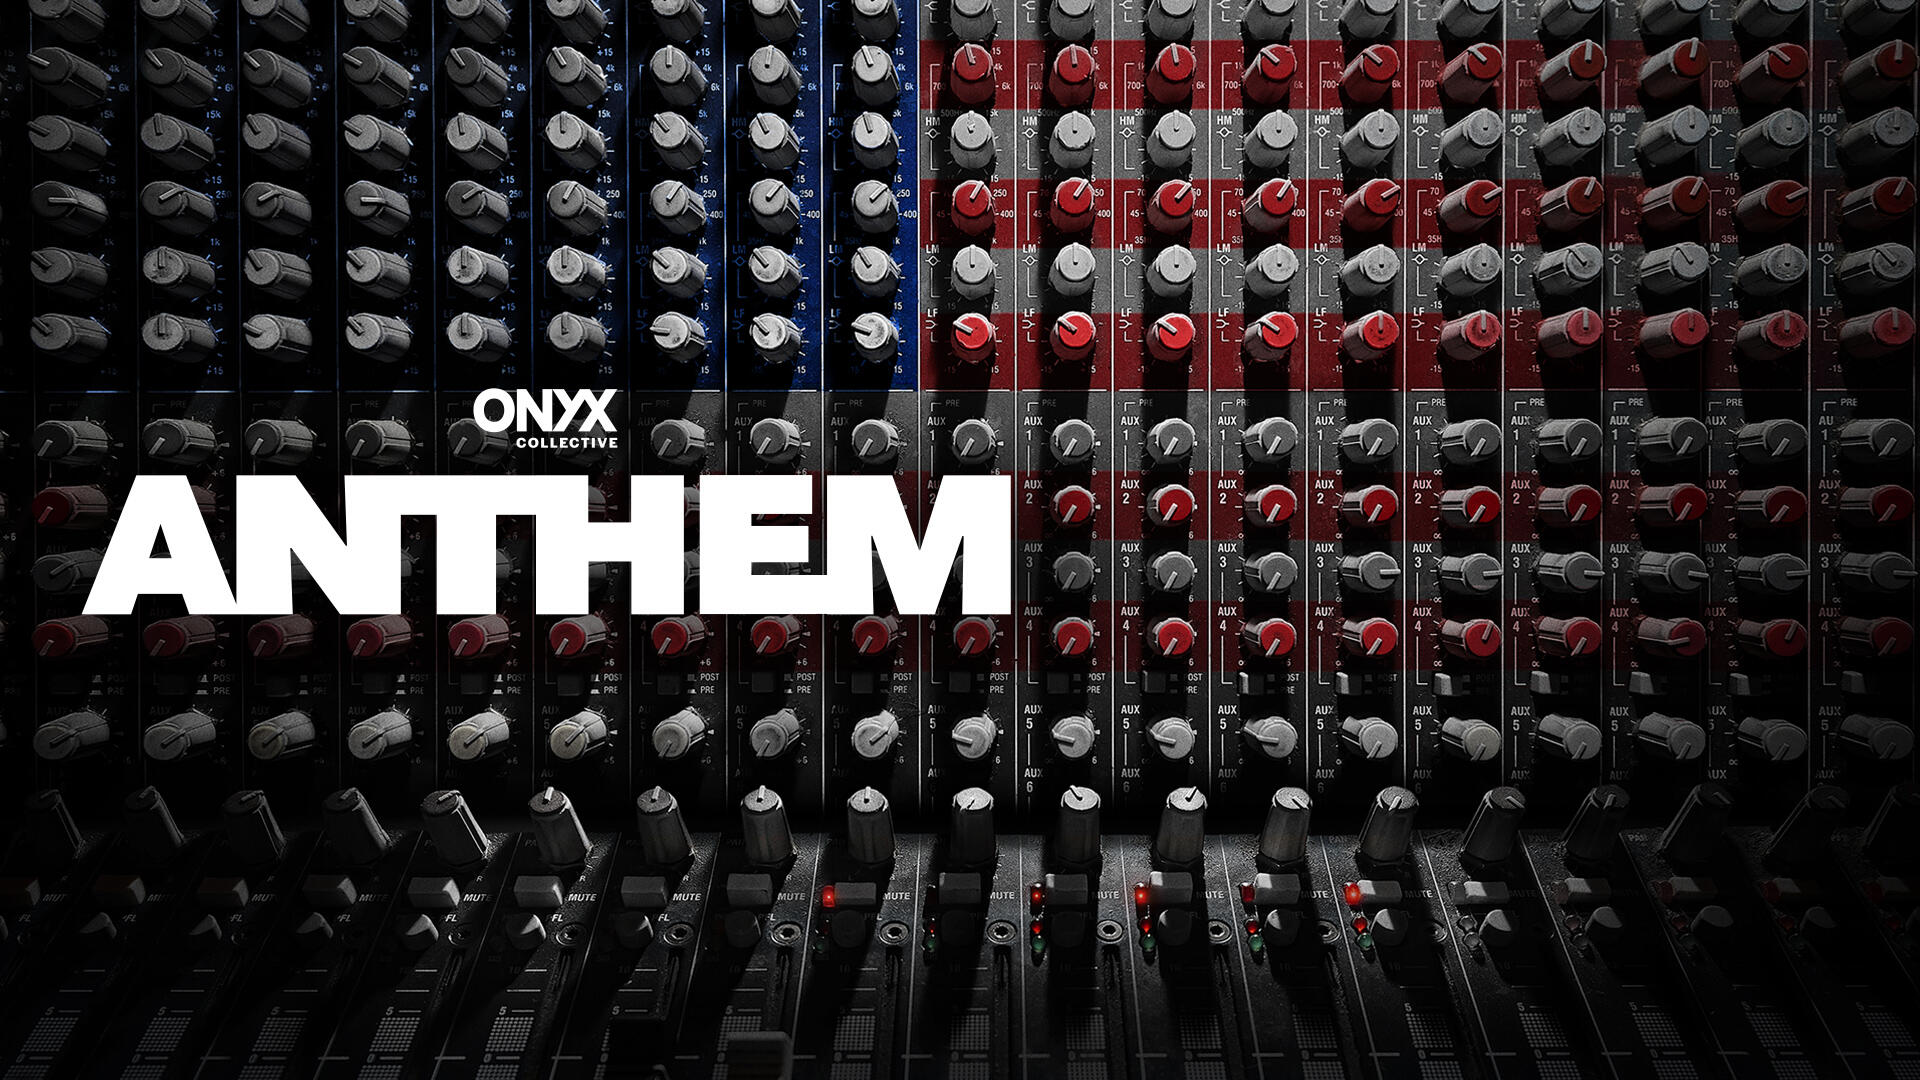 Anthem -- Season 1 -- Reflecting upon “The Star-Spangled Banner,” “Anthem” follows acclaimed composer Kris Bowers (“Bridgerton,” “When They See Us,” “King Richard”) and GRAMMY®-winning music producer Dahi (Travis Scott, Kendrick Lamar, Drake) as they take a musical journey traveling across America to create a new sound, inspired by what our country’s national anthem might be if written in today’s time. (Courtesy of Hulu)